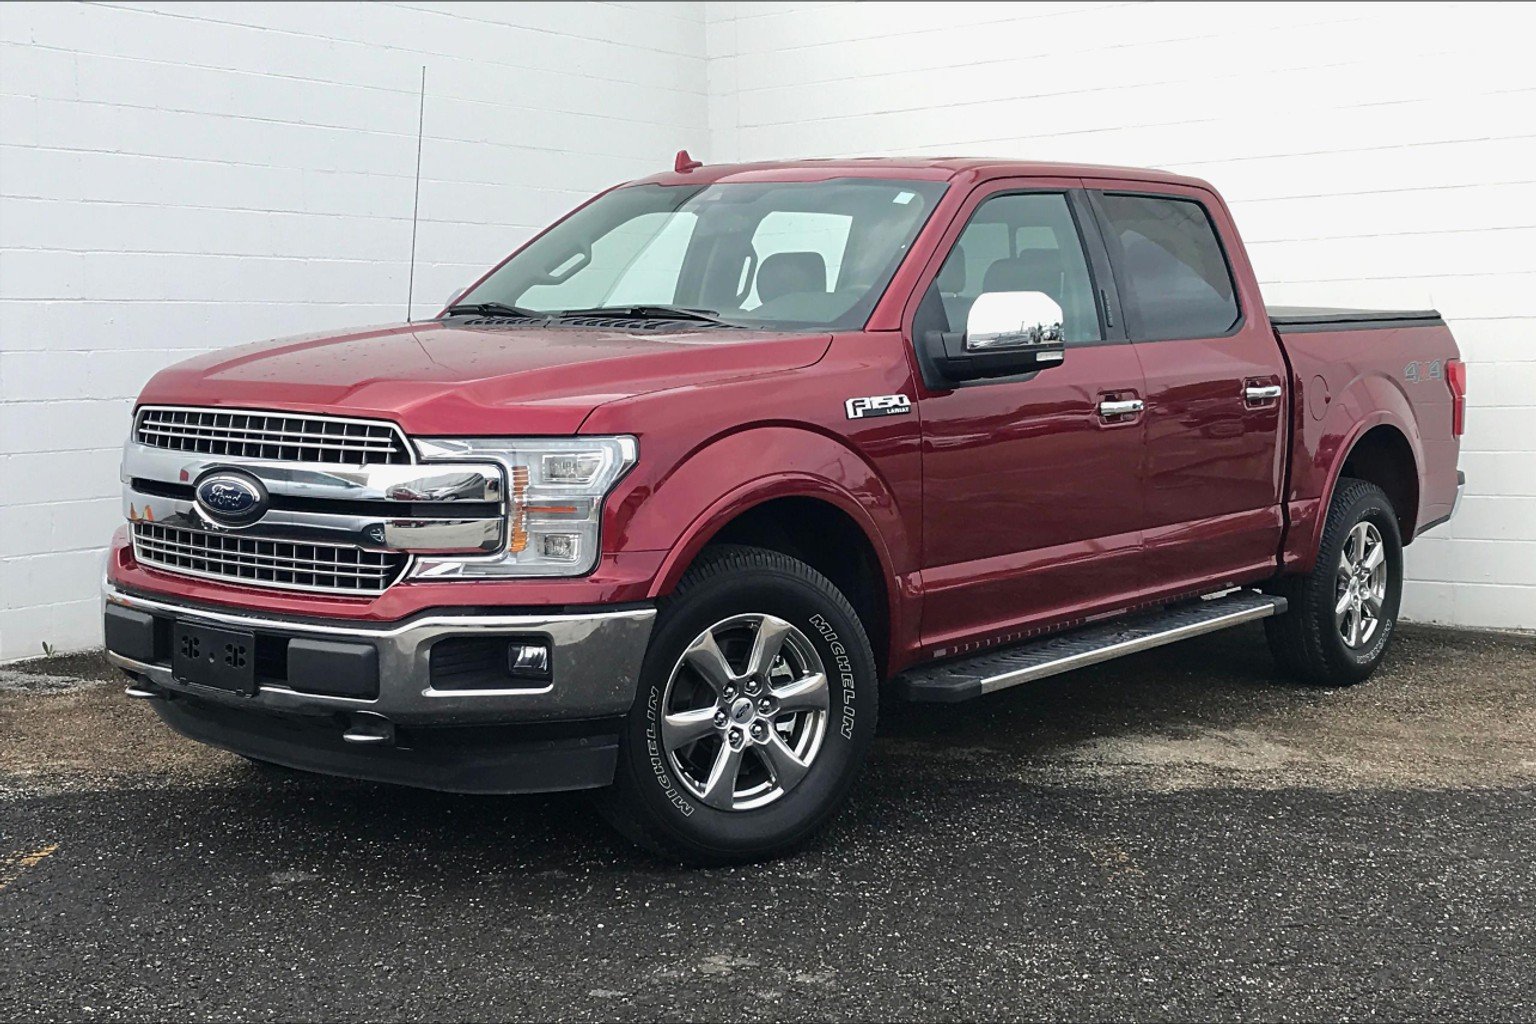 Pre-Owned 2018 Ford F-150 LARIAT 4WD SuperCrew 5.5' Box Crew Cab Pickup